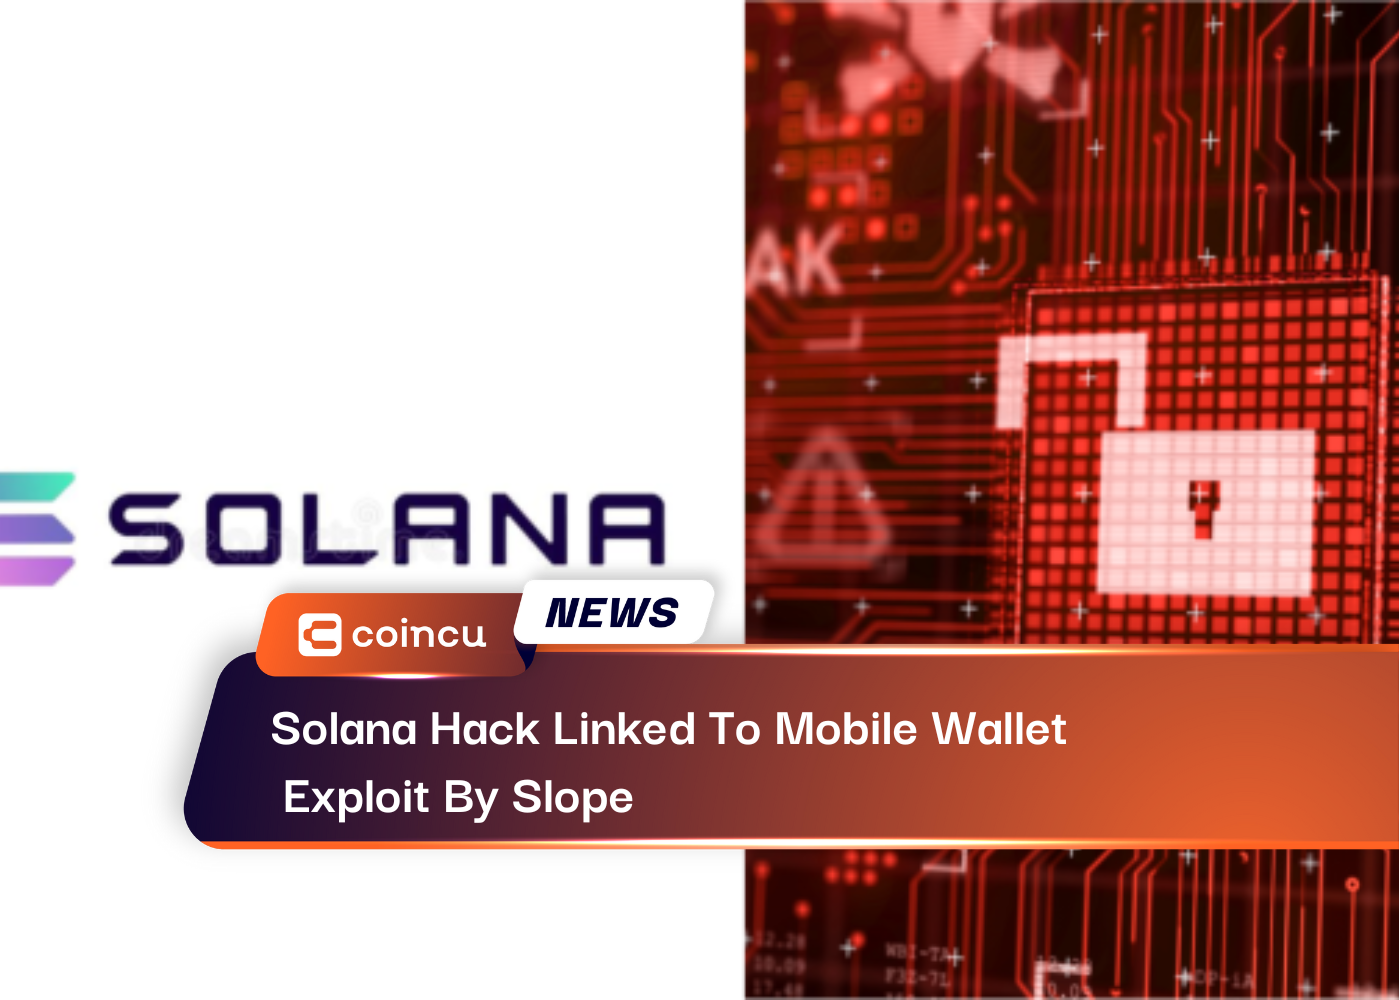 Solana Hack Linked To Mobile Wallet